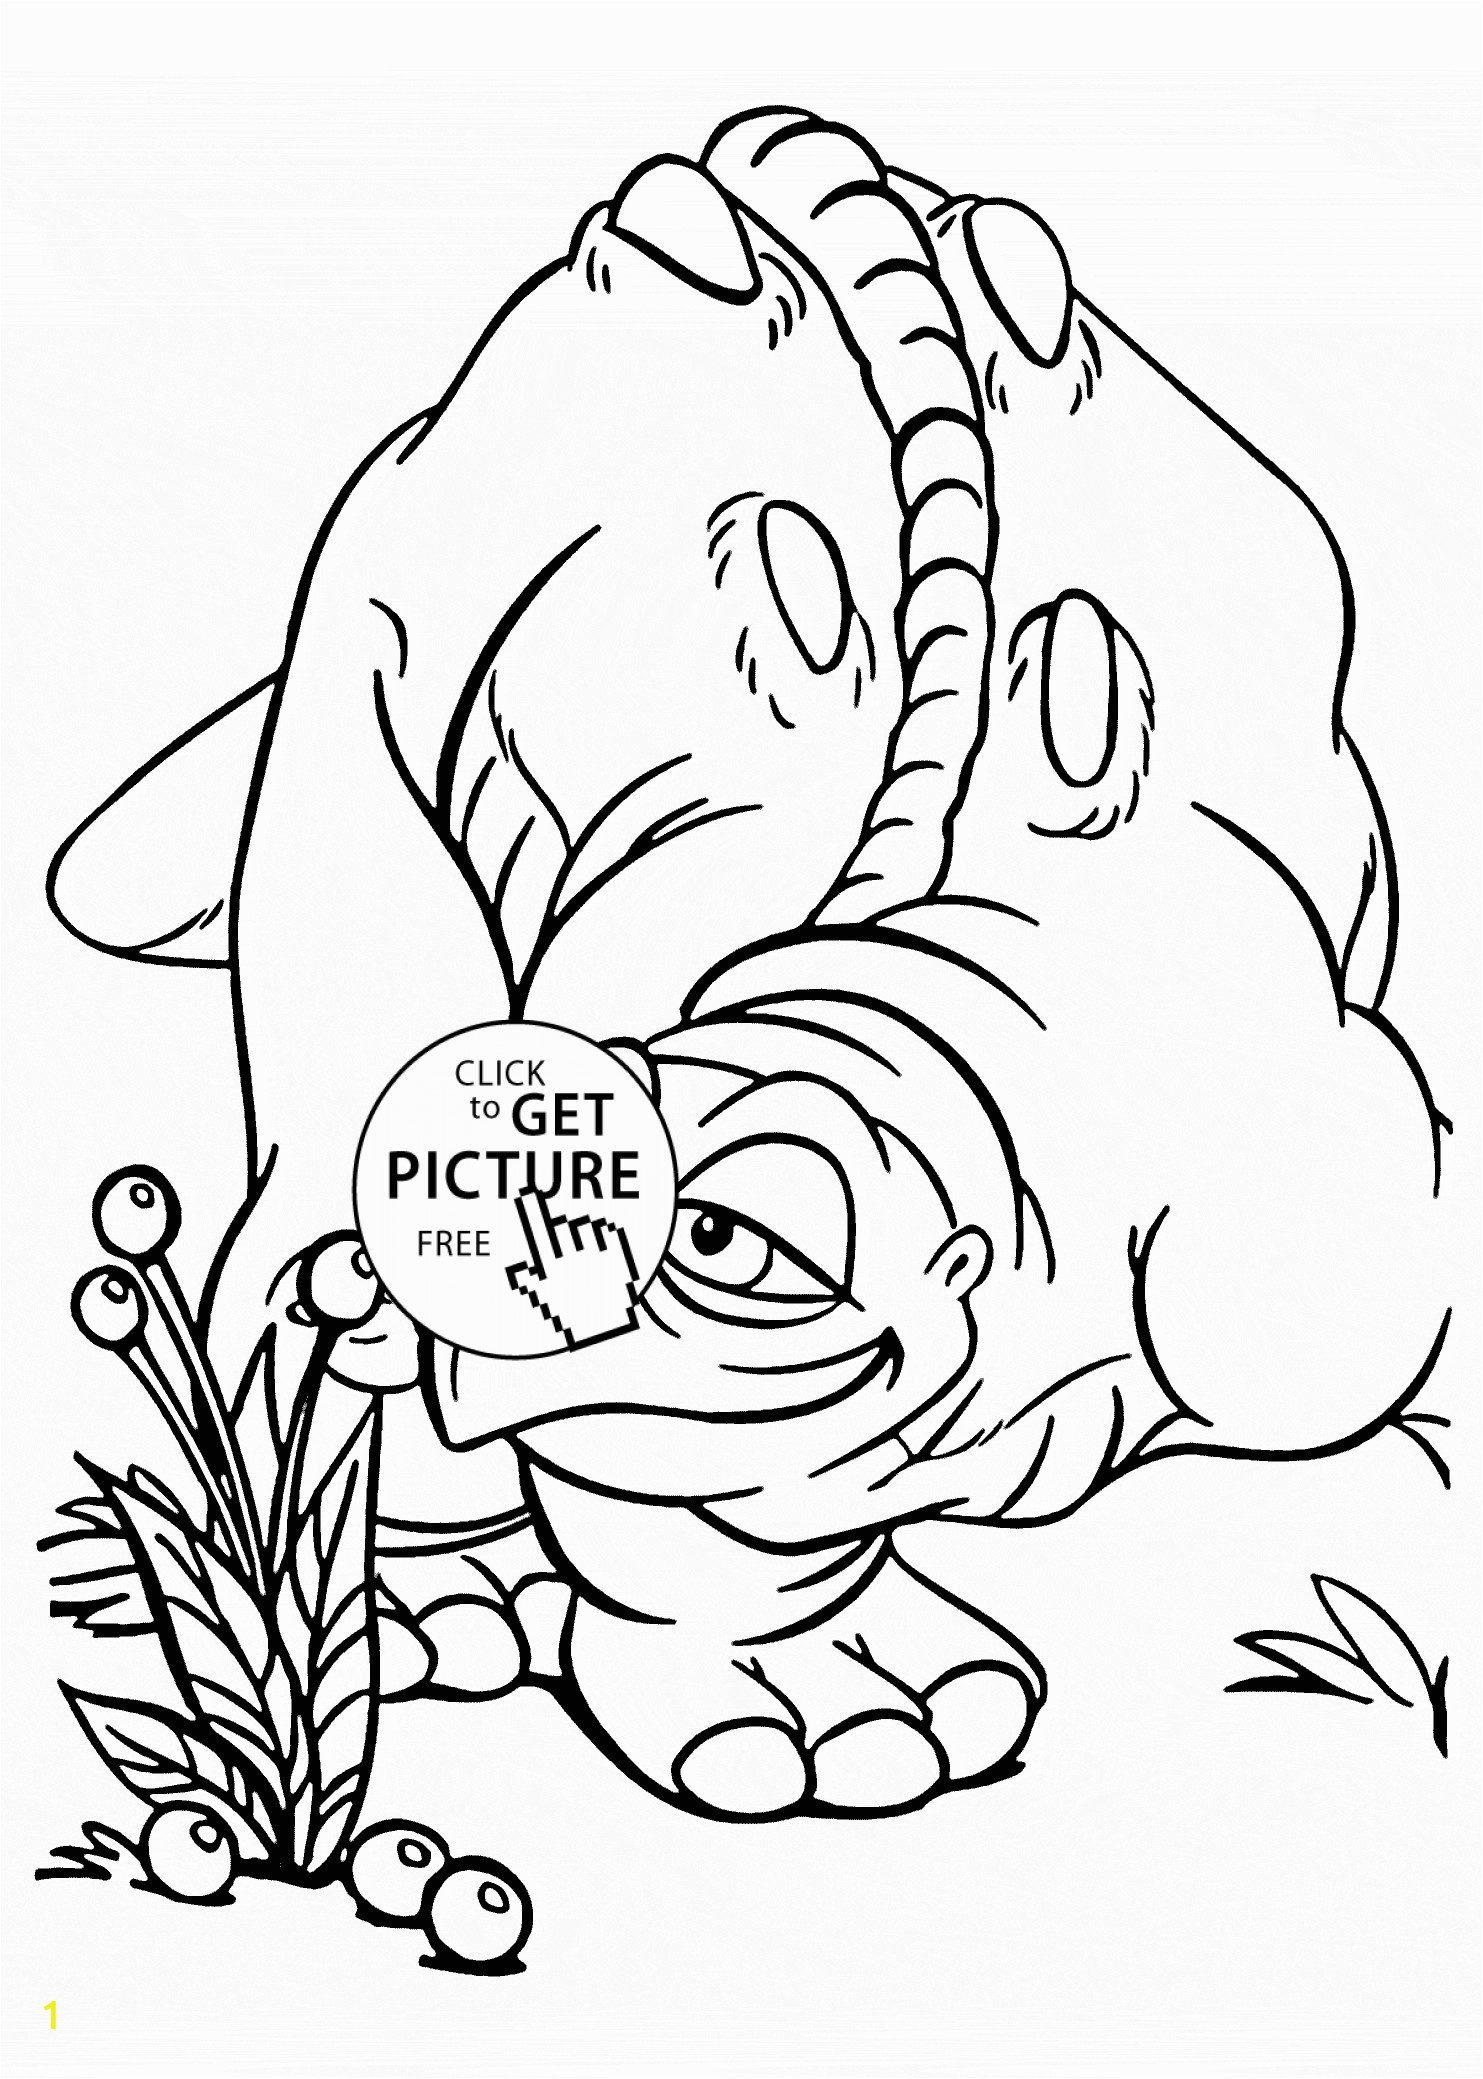 spike from land before time coloring pages for kids printable free land before time